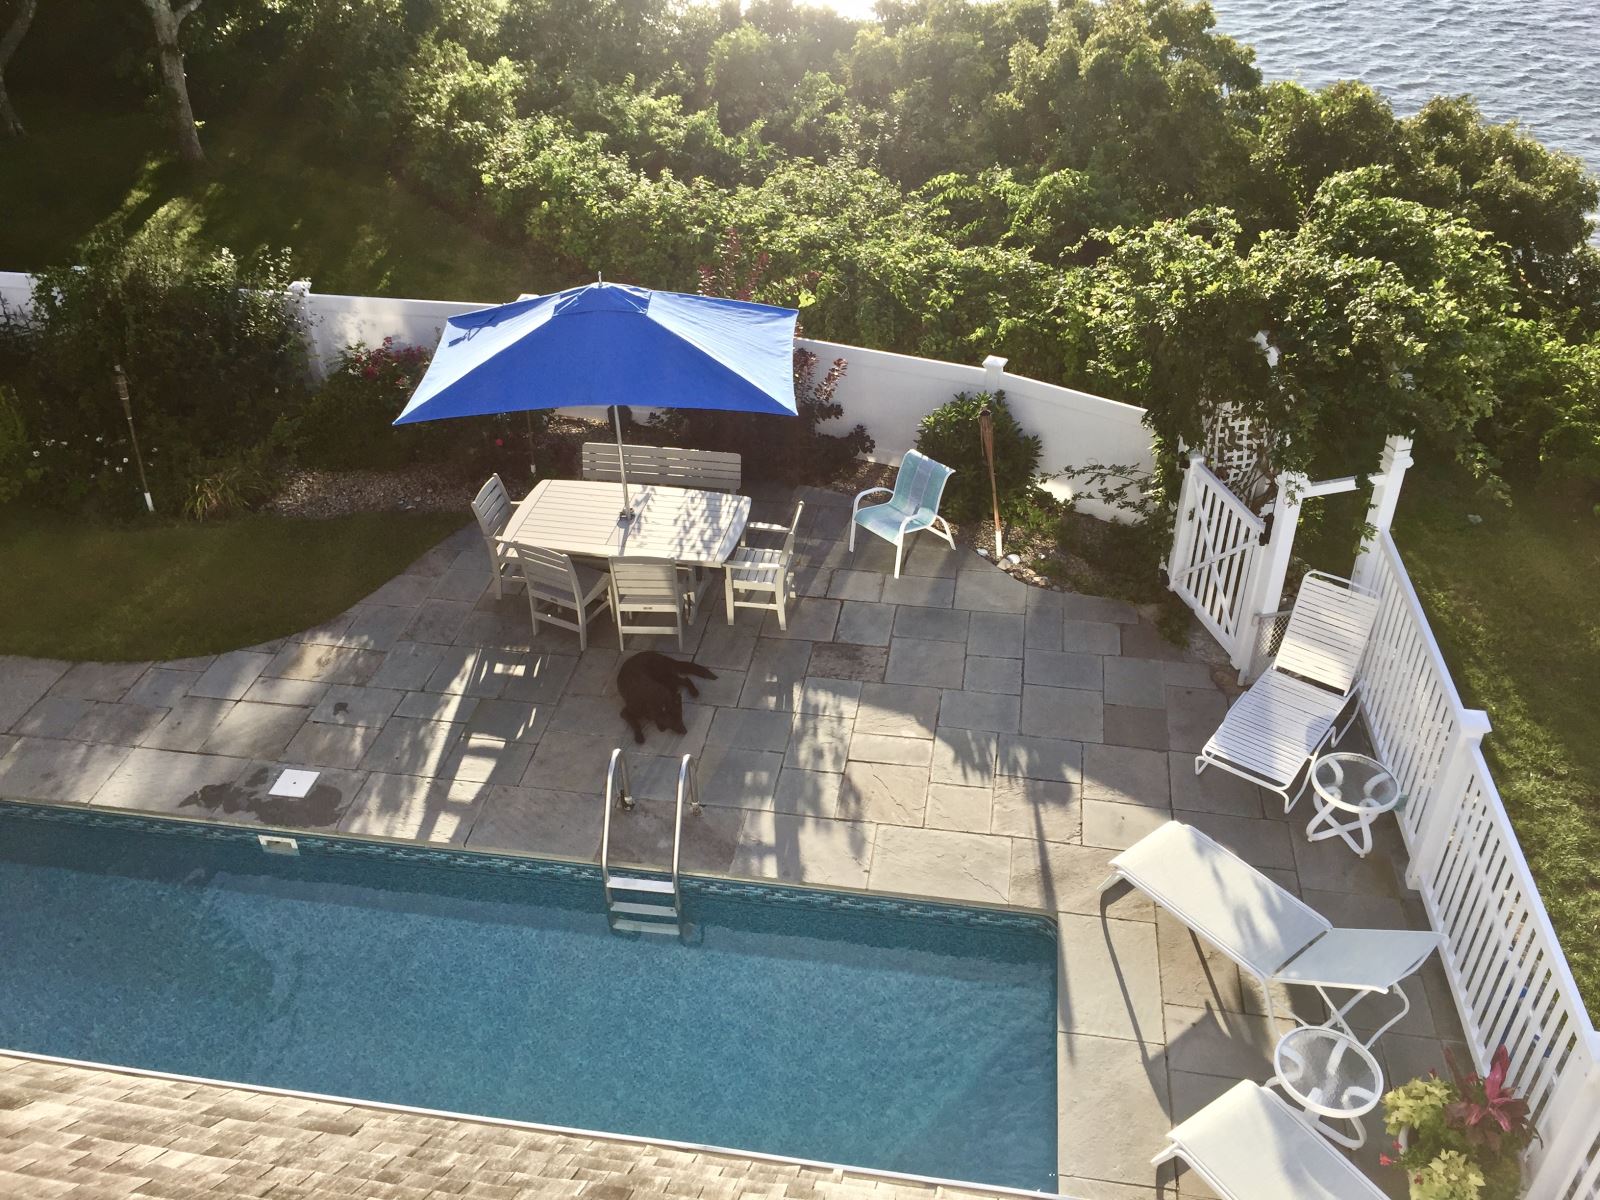 An in-ground pool and patio surrounded by a fence is just one of the safety regulations homeowners will need to abide by when using Nauset Rental as their property manager.